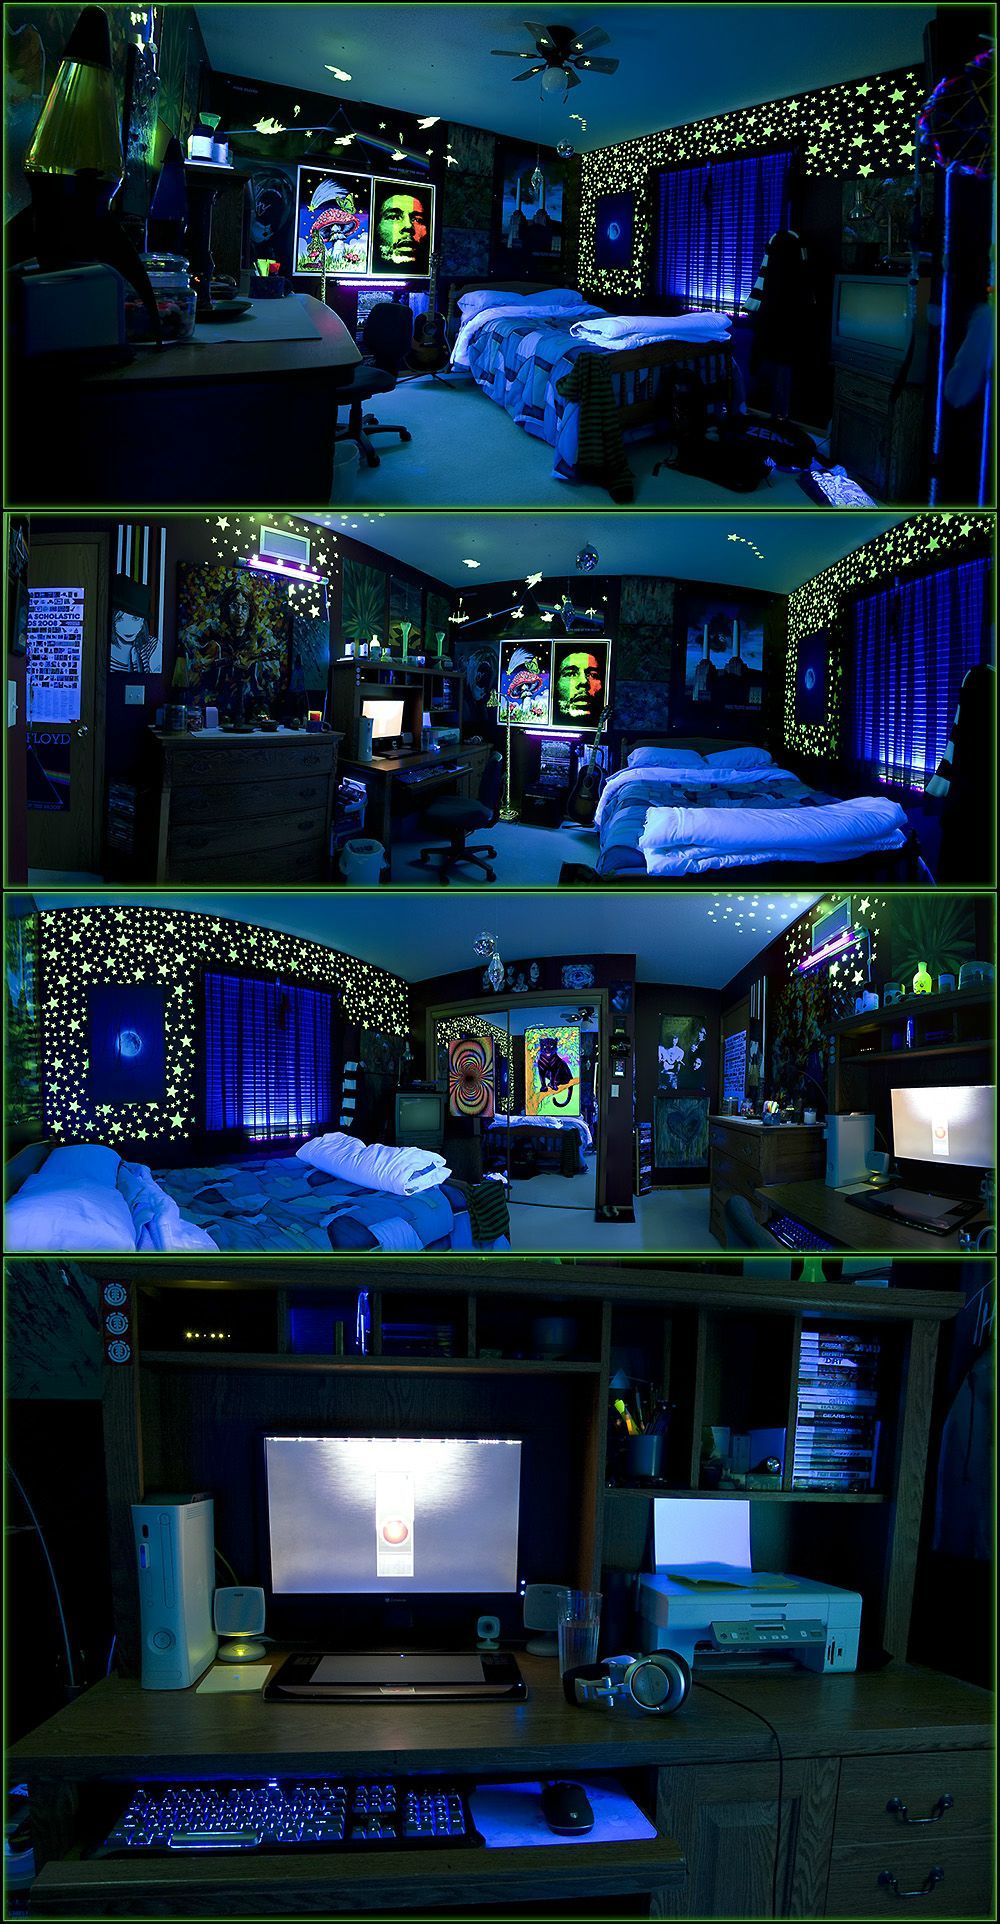 10 Amazing Black And Blue Bedroom Ideas black blue lit cool stoner room cb99c2b7d9a0e280a2e2978be299a5 for the home e299a5e2978be280a2d9a0c2b7cb99 in 2024